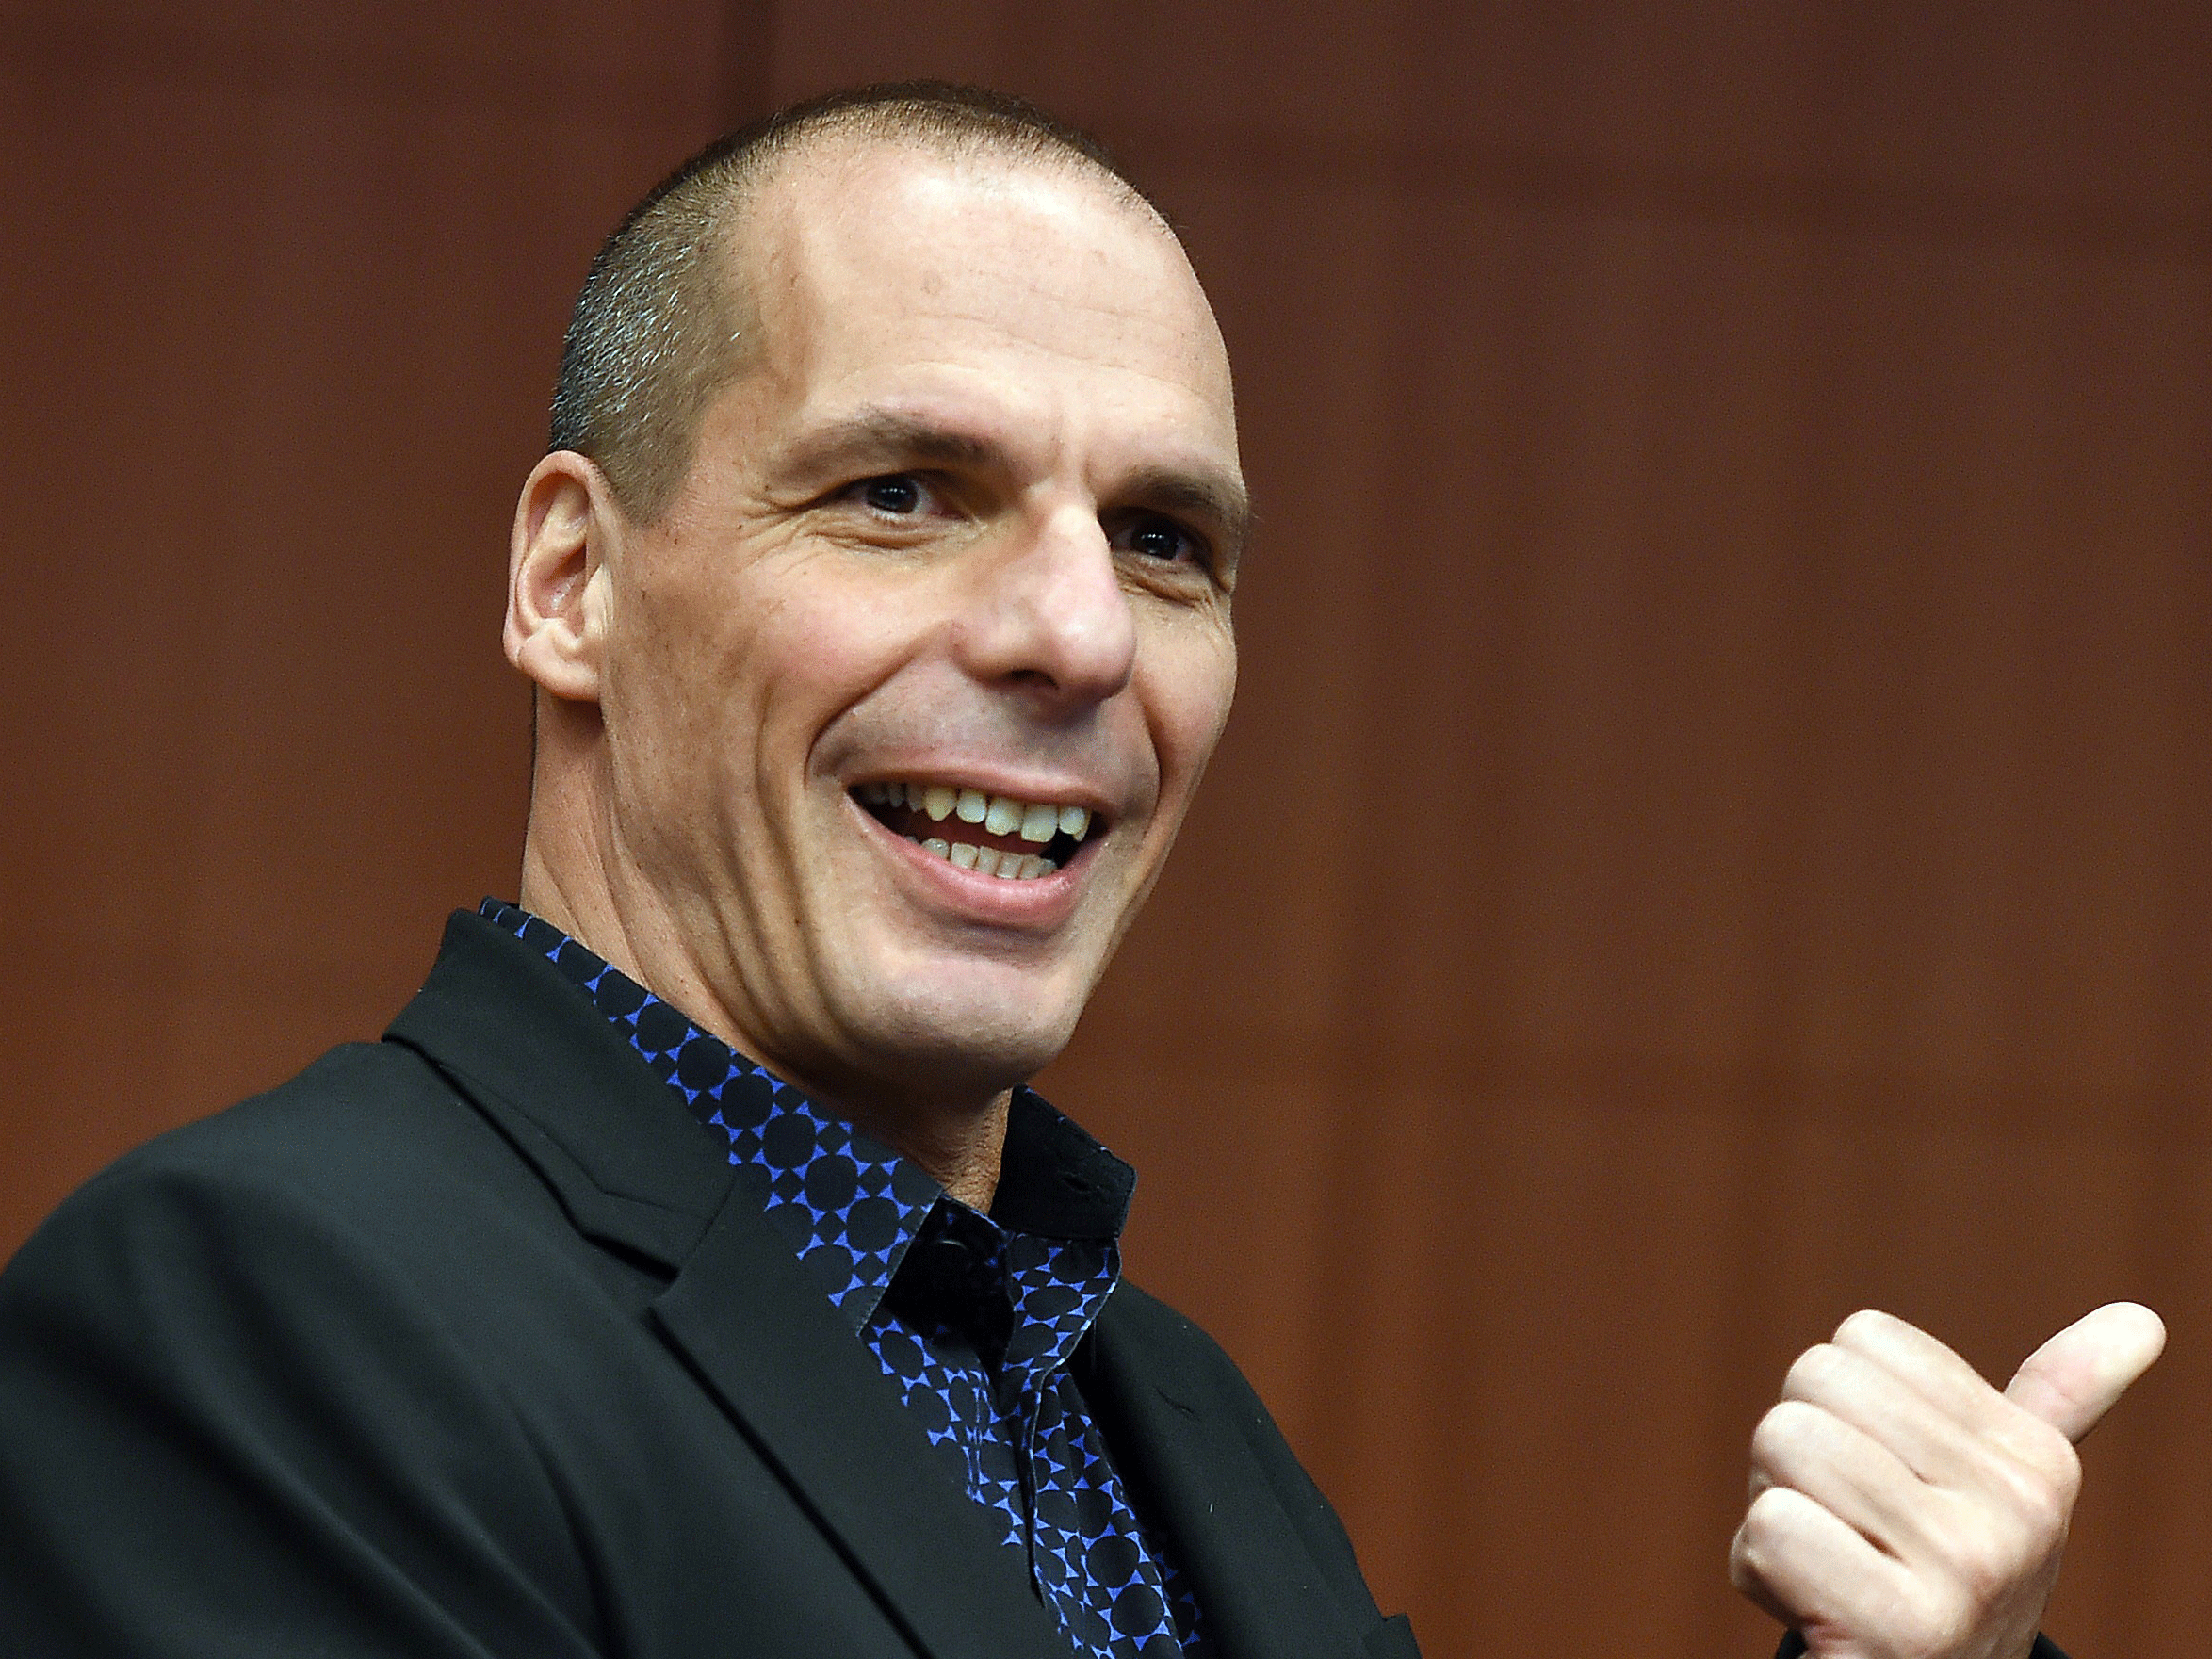 Yanis Varoufakis has reportedly been "kicked out" of the Syriza party